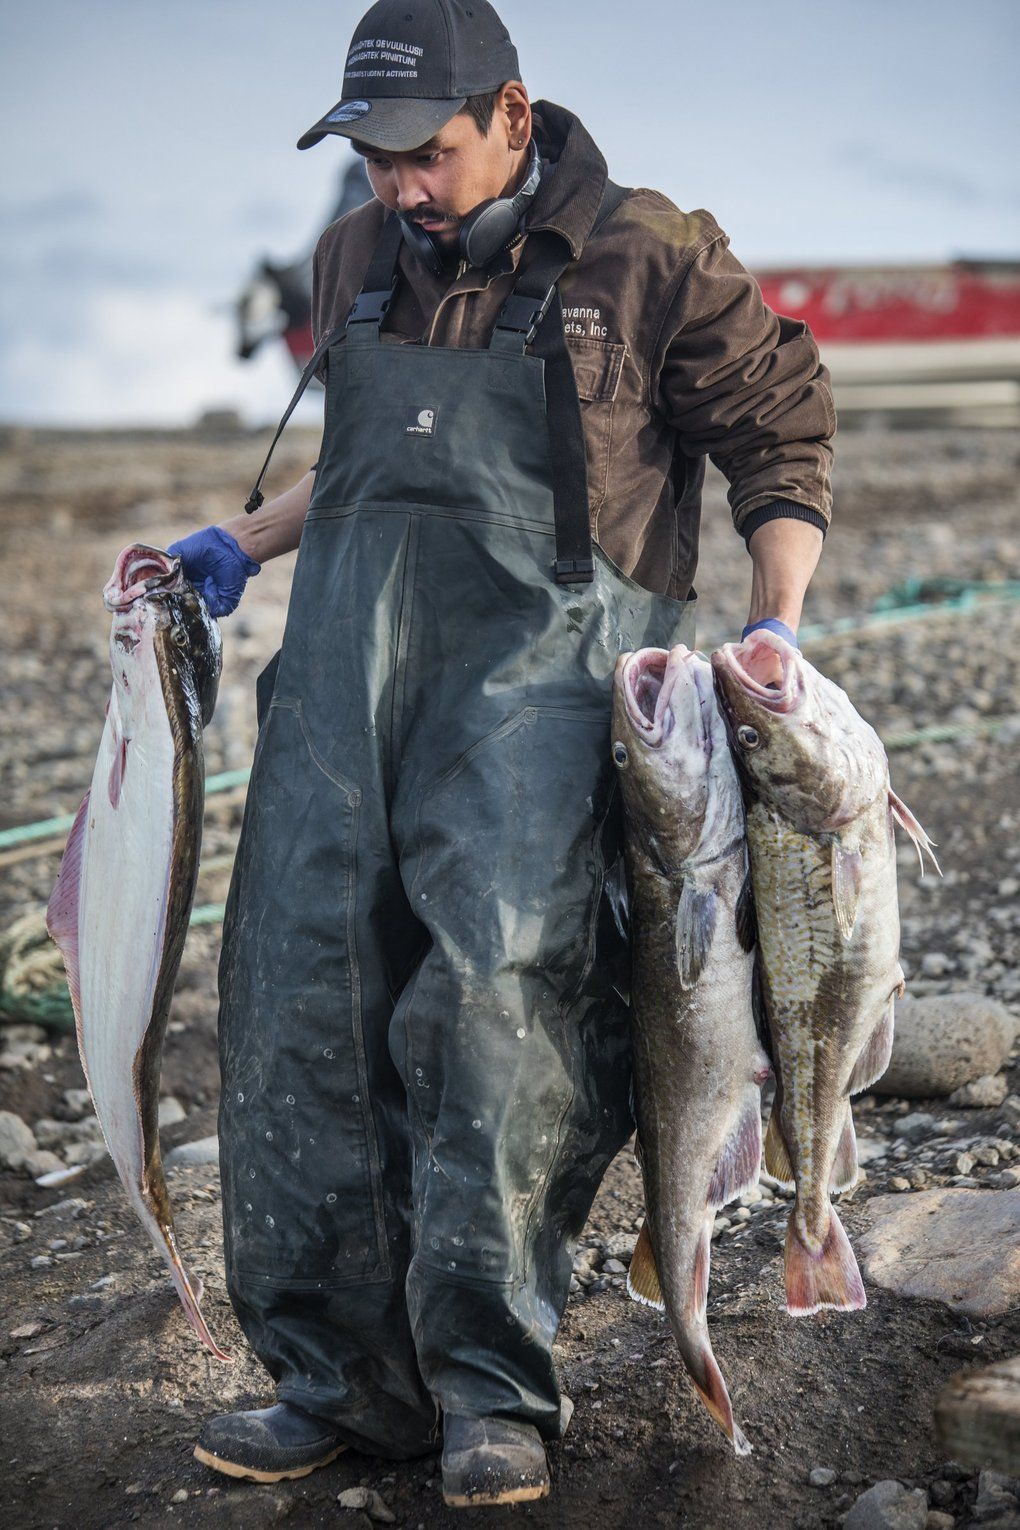 Robin Kogassagoon carries halibut and Pacific cod caught with longline gear during a late August fishing trip out of Savoonga. Halibut are the most valuable catch, but the crew mostly caught cod. Image by Steve Ringman. United States, 2019.